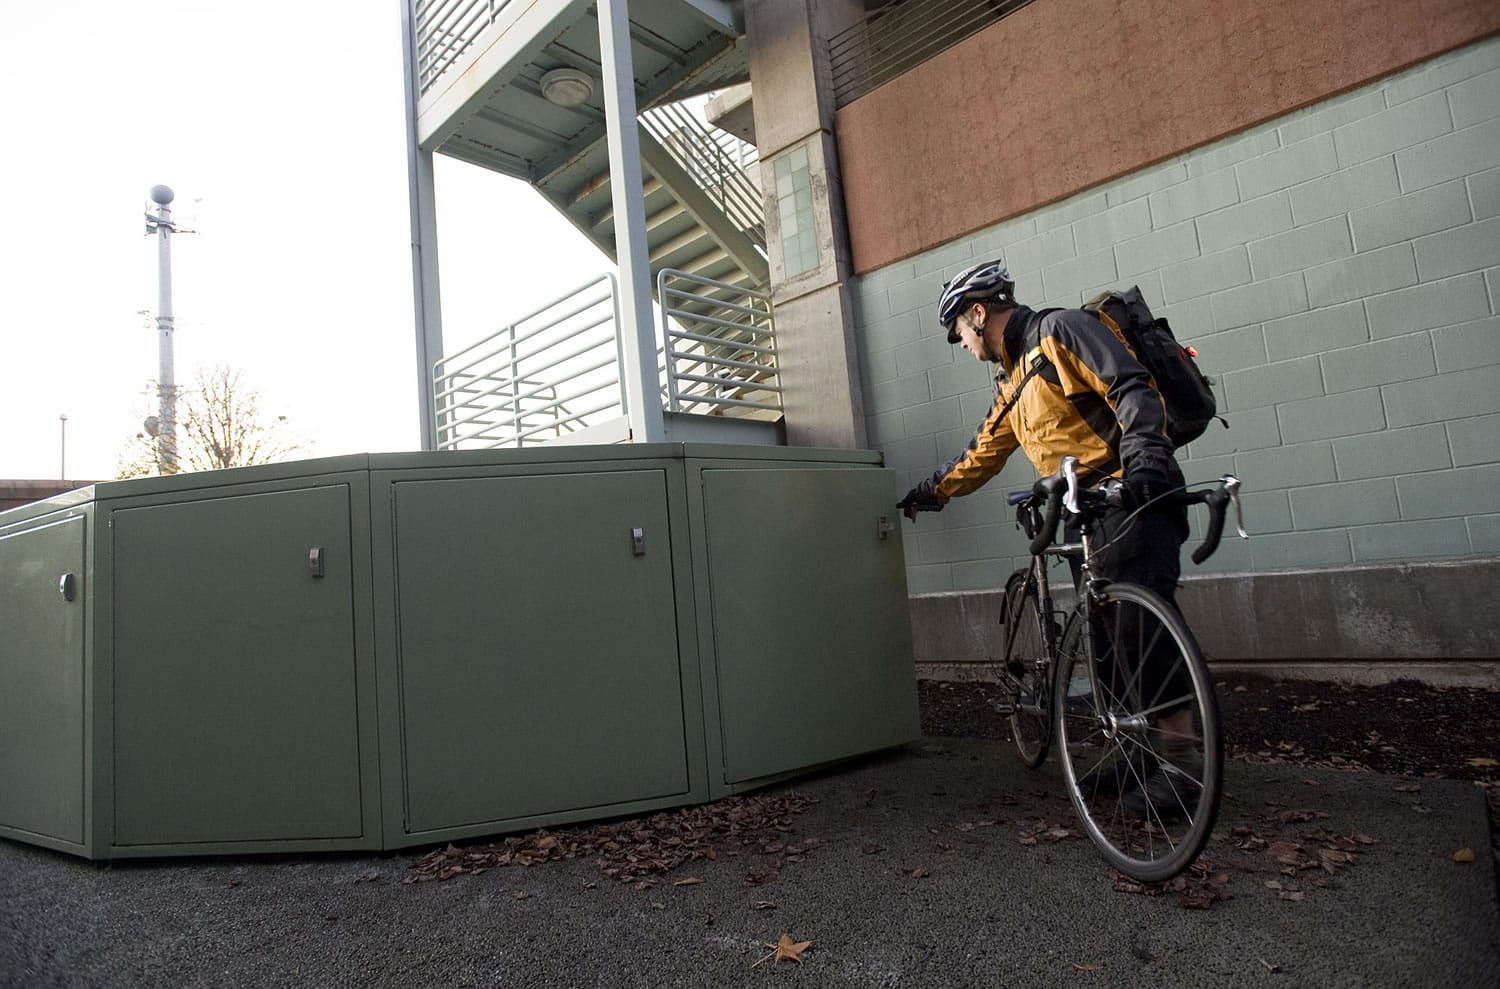 Clark County natural resources specialist Ian Wigger is among Vancouver's workers who commute by bicycle.